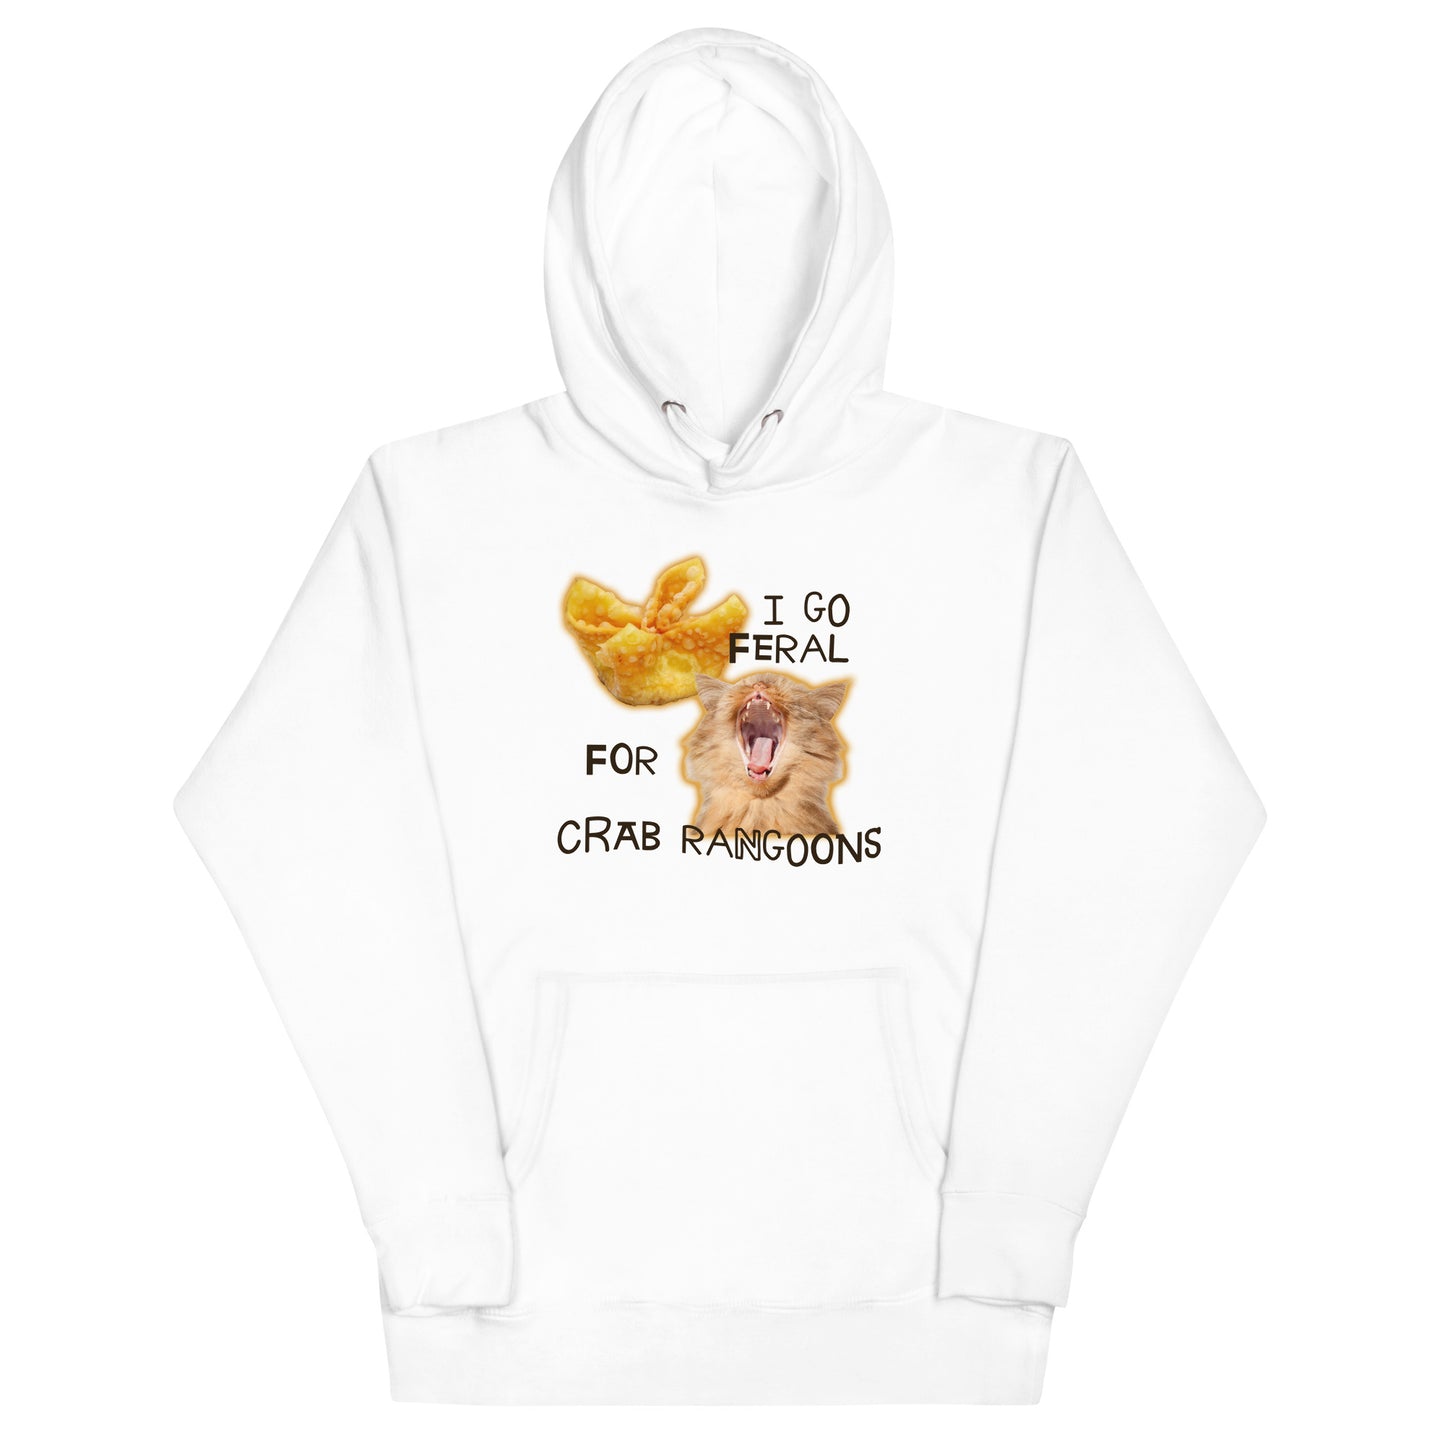 I Go Feral for Crab Rangoons Unisex Hoodie